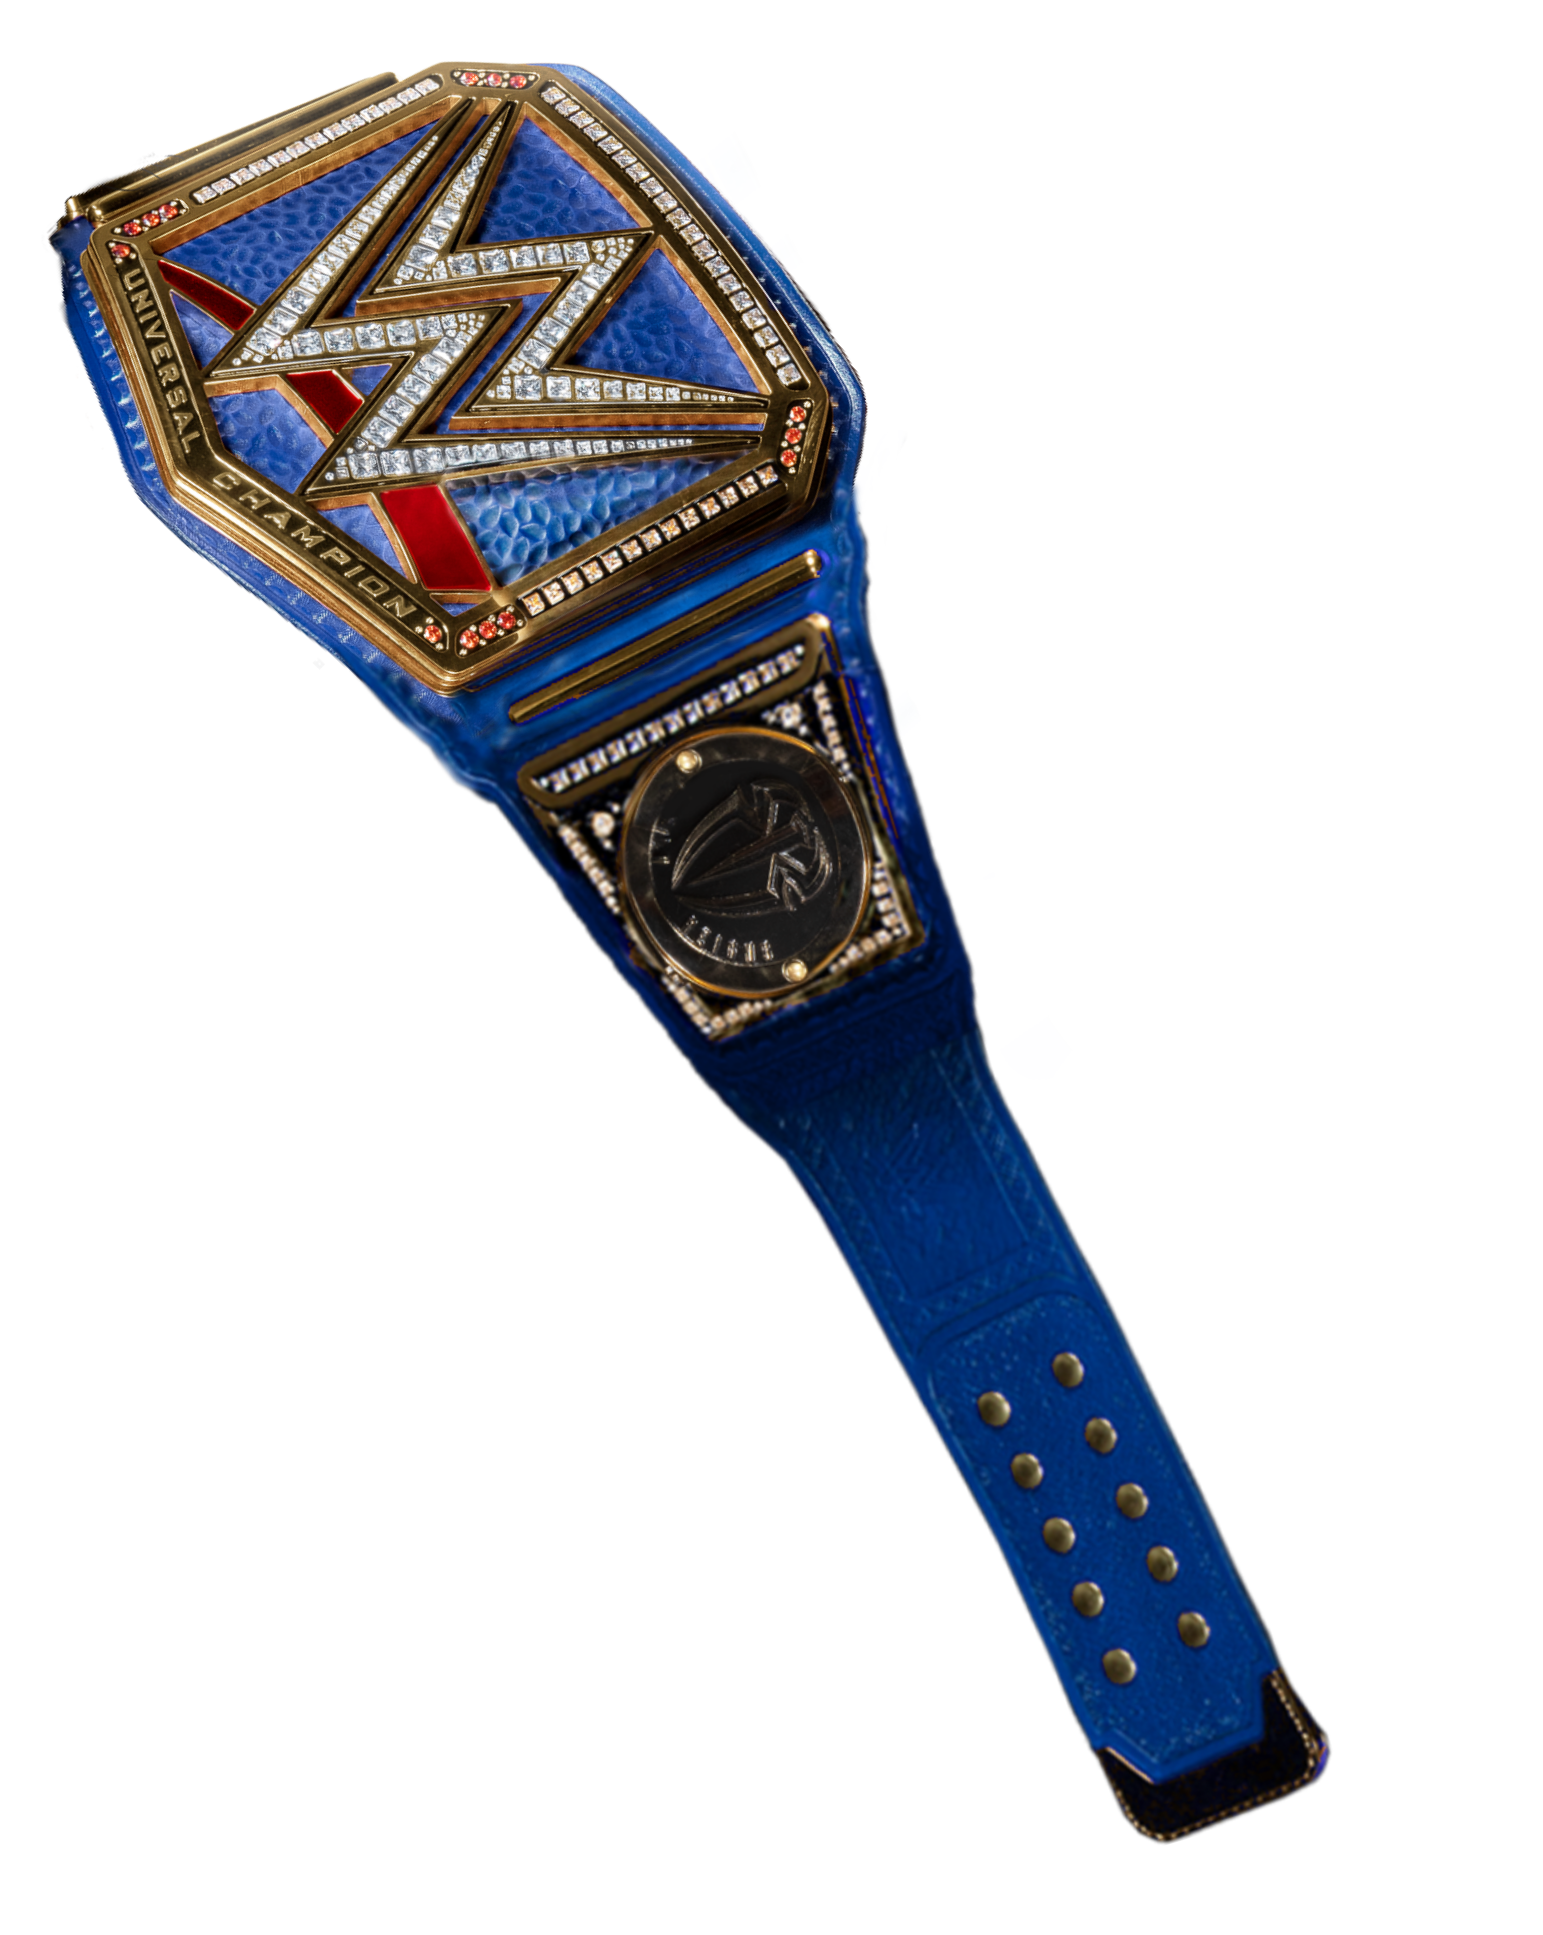 New Universal Championship Render By Wwe Designers By Wwedesigners On Deviantart